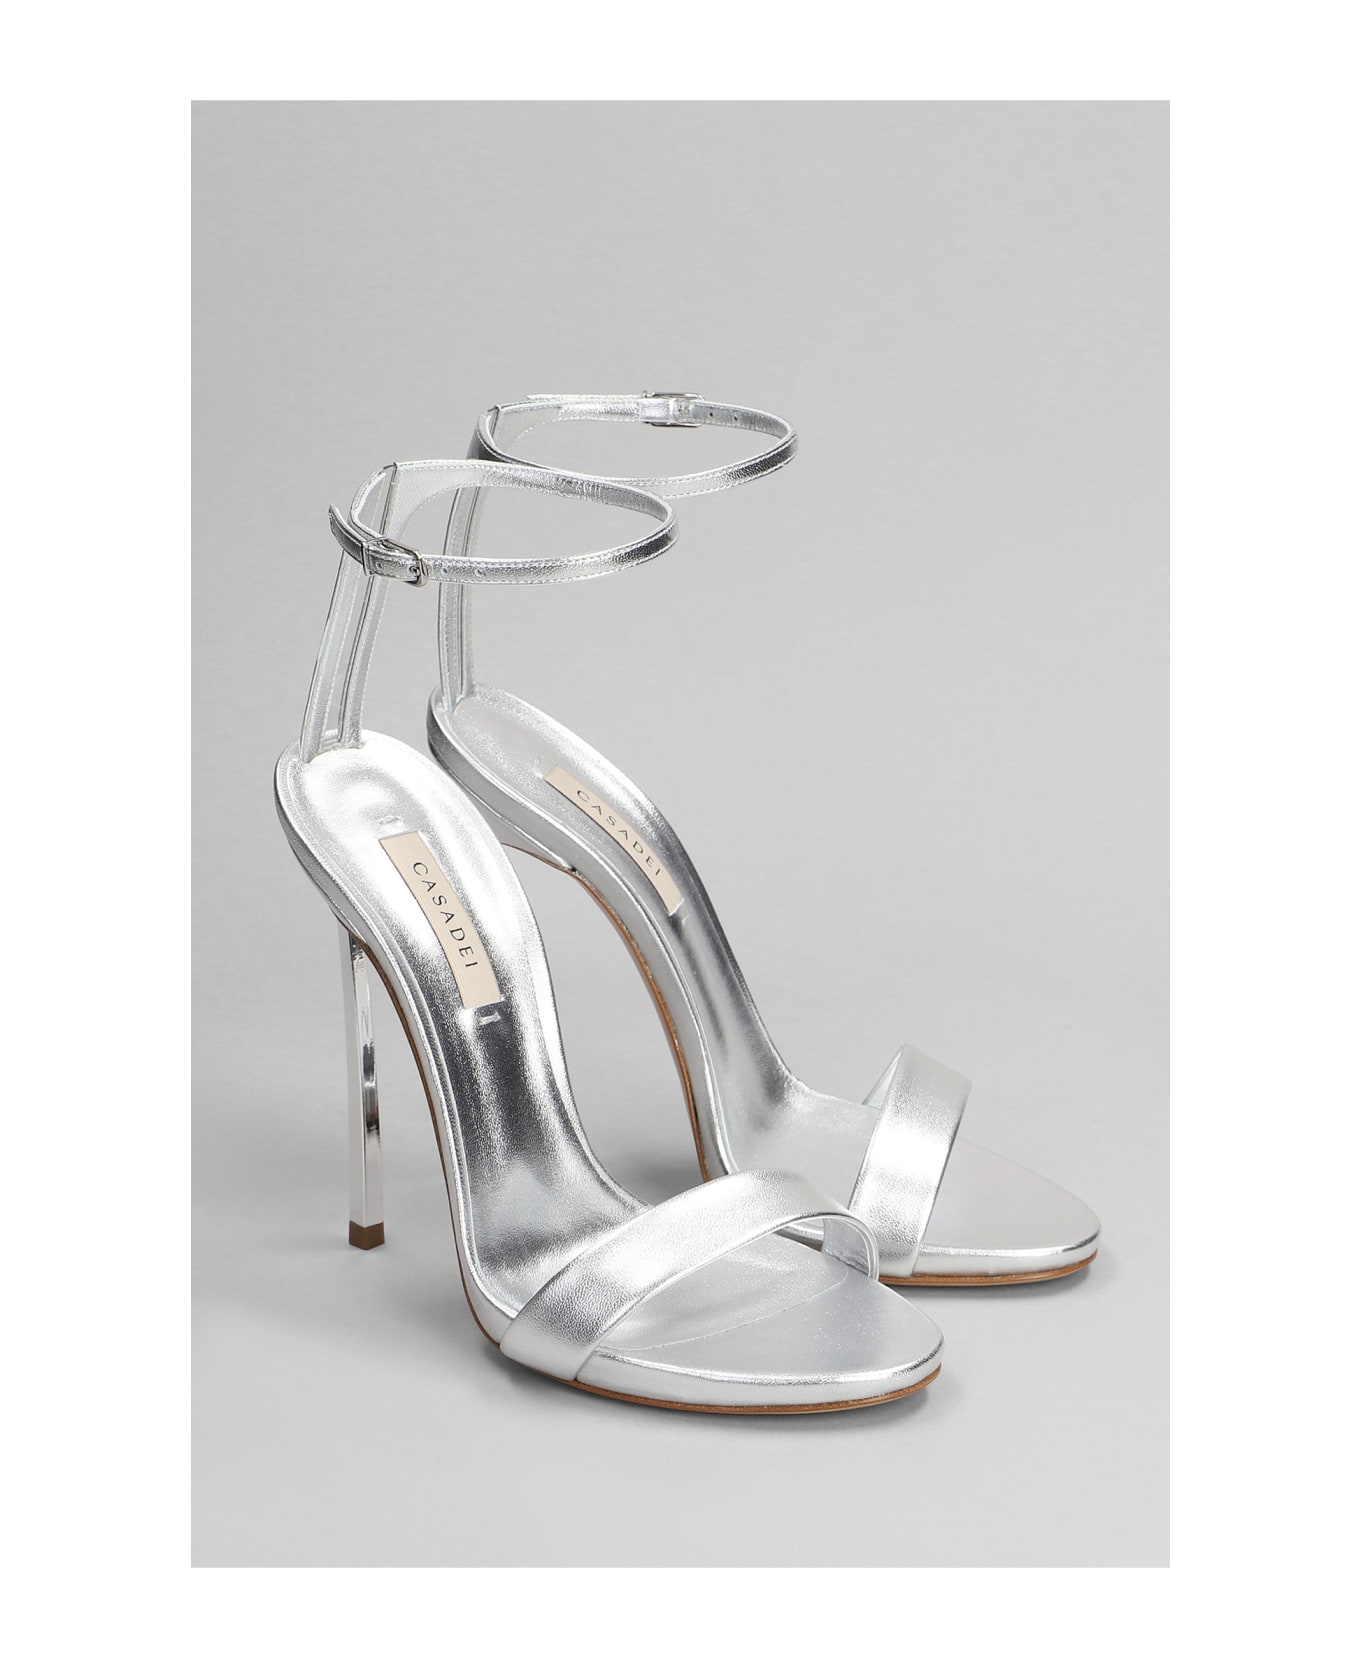 Casadei Sandals In Silver Leather - silver サンダル